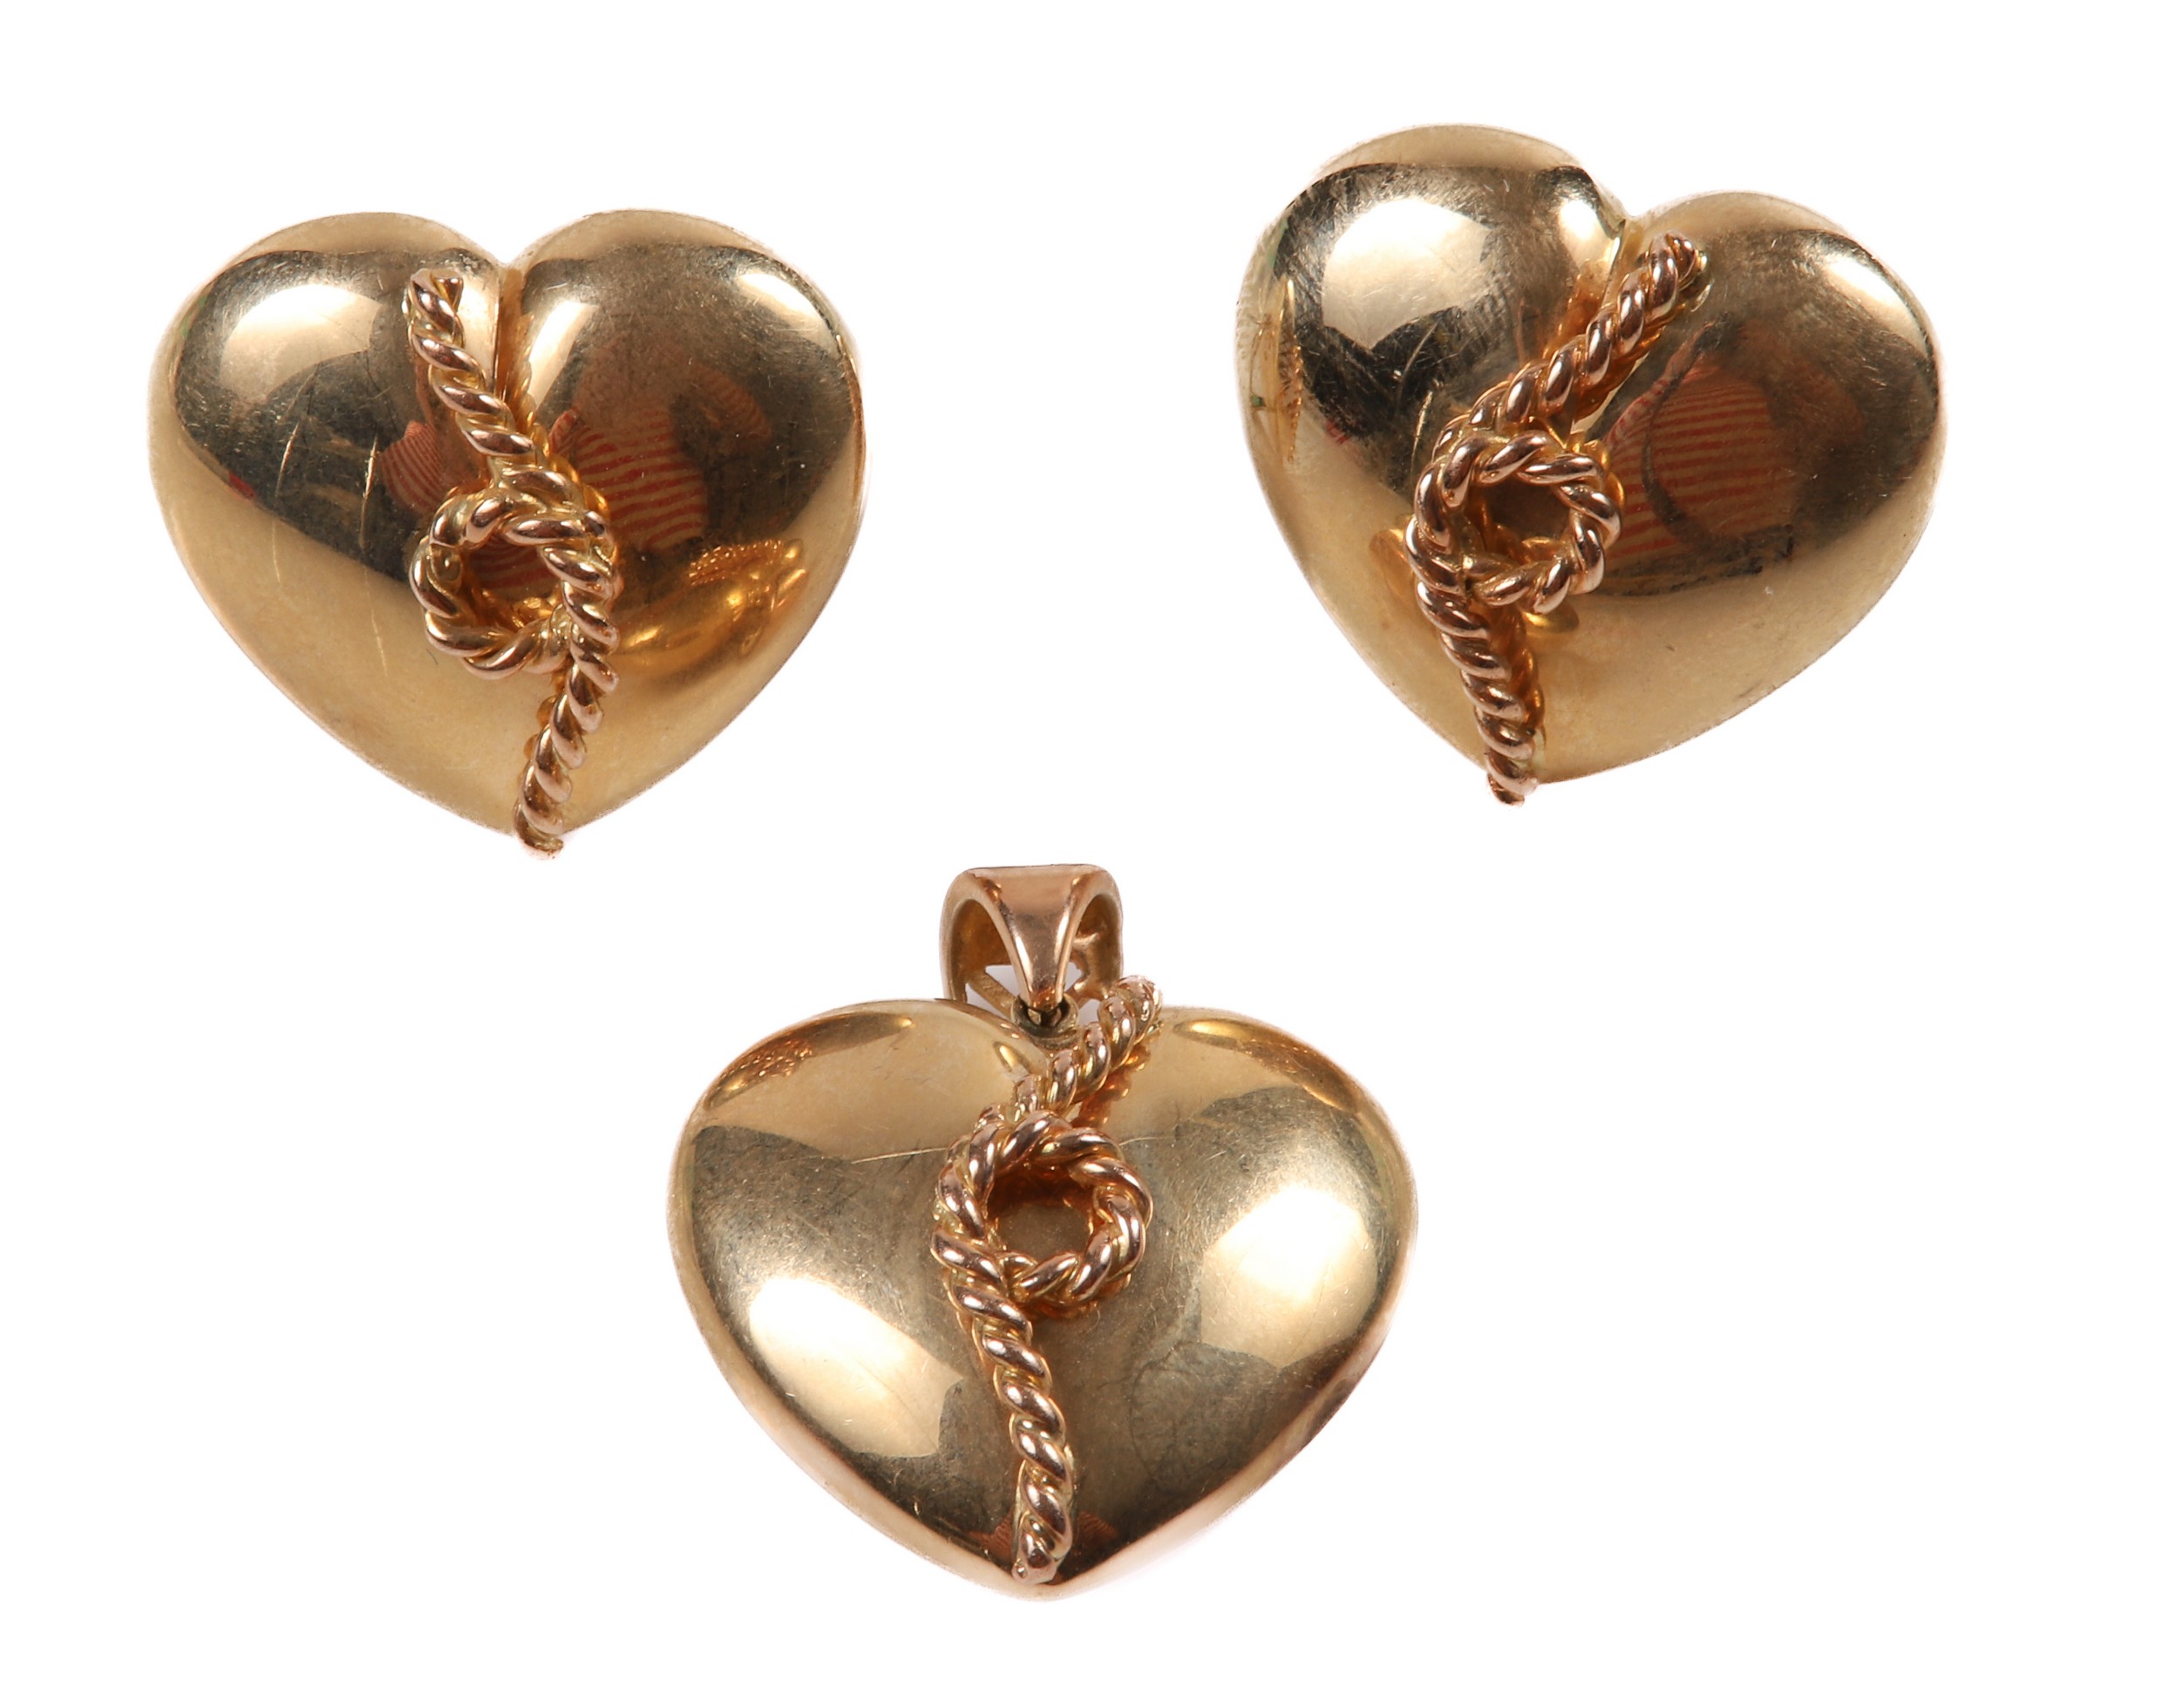 14K heart and knot earrings and 27a40c